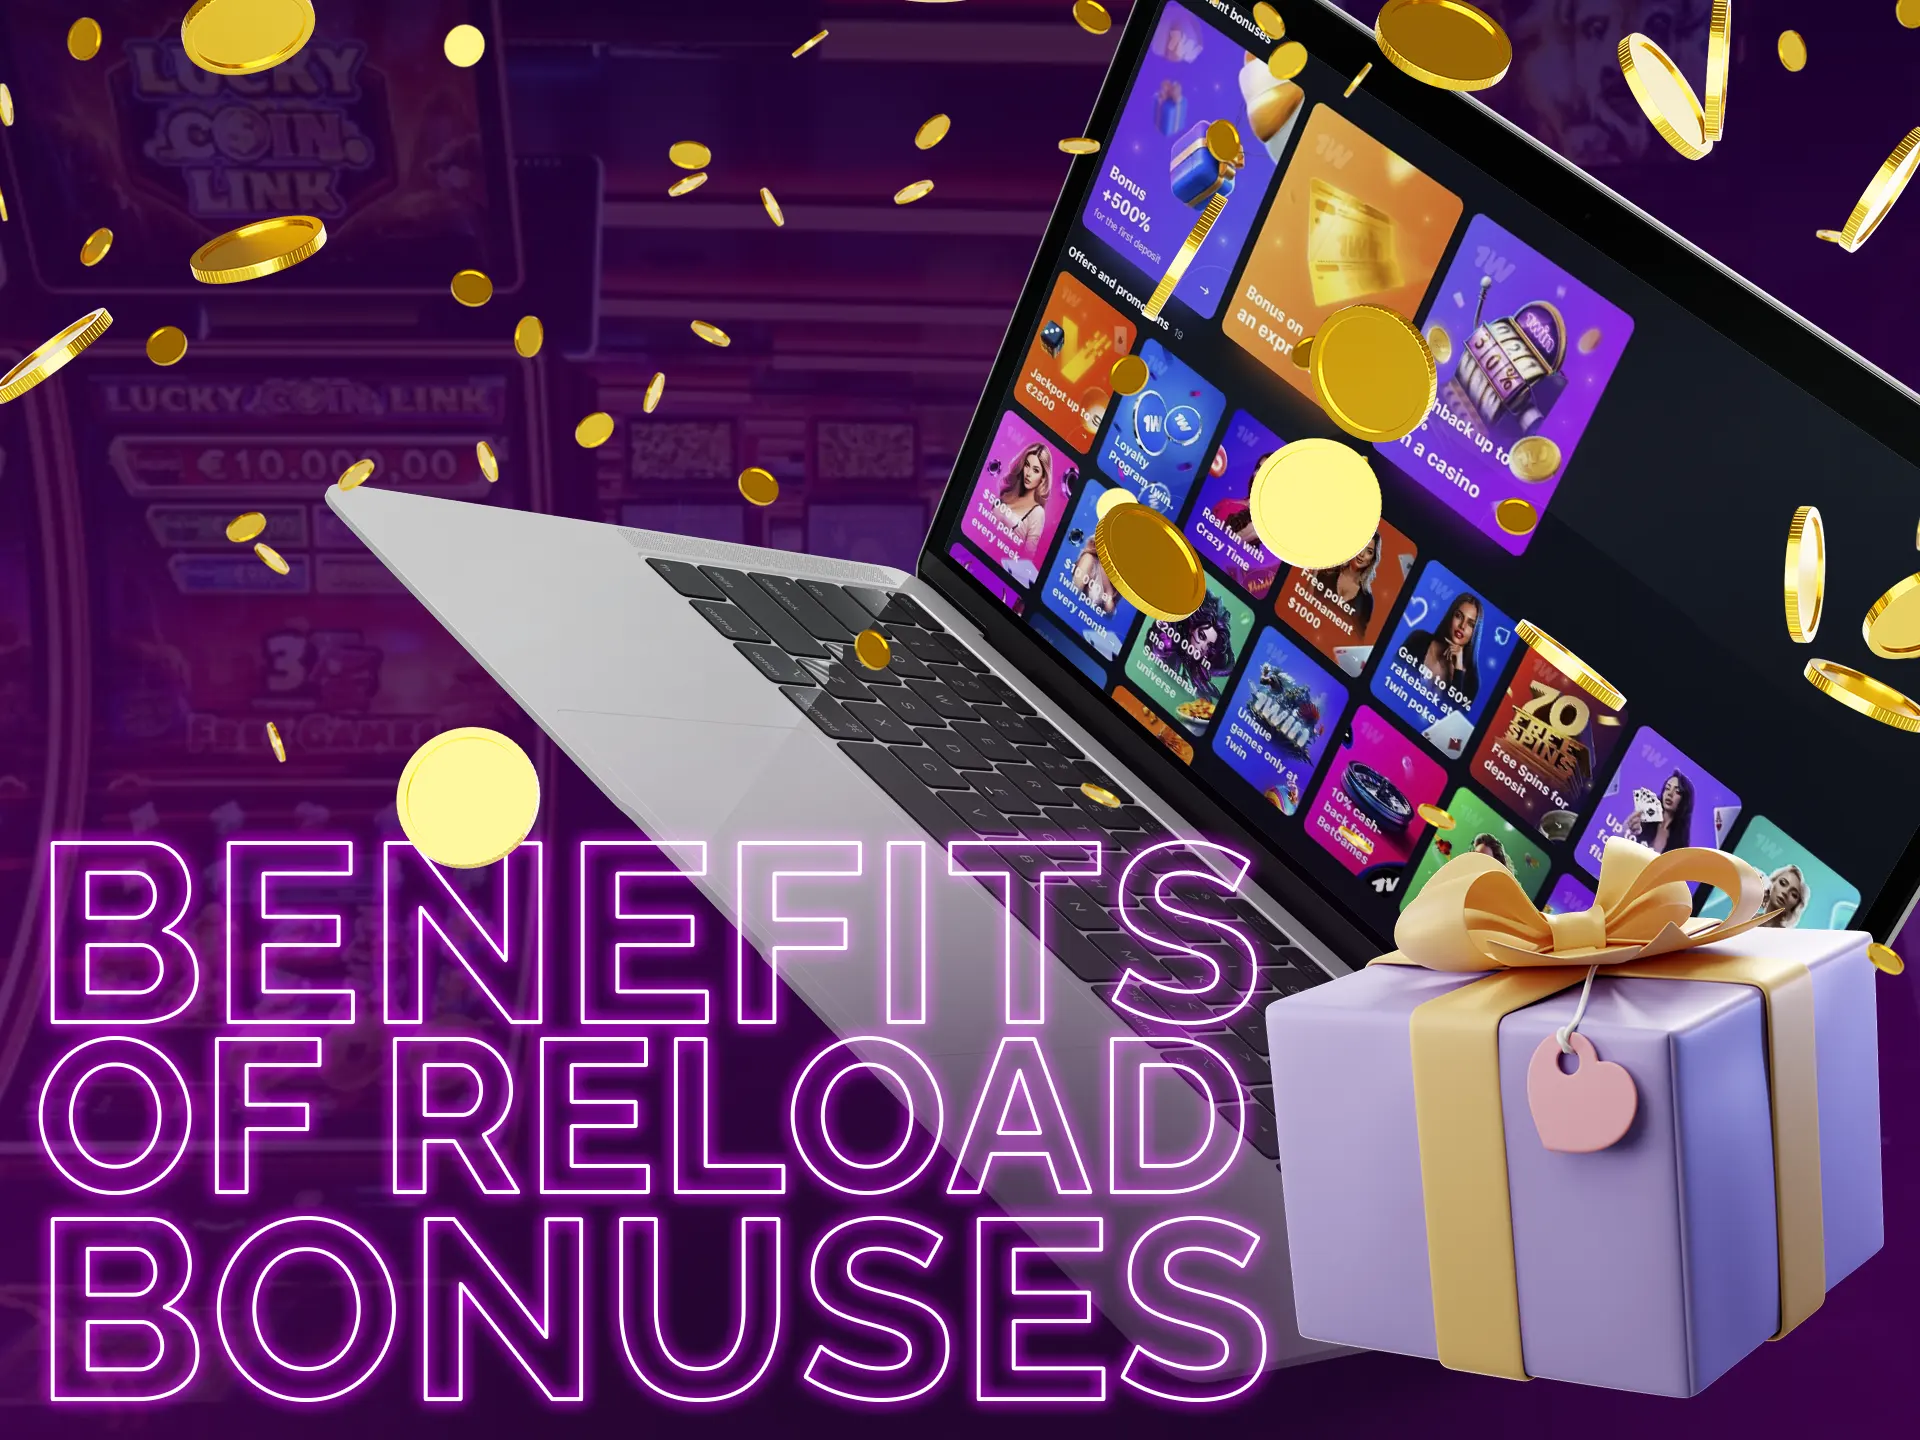 Amazing benefits coming from reload bonuses.